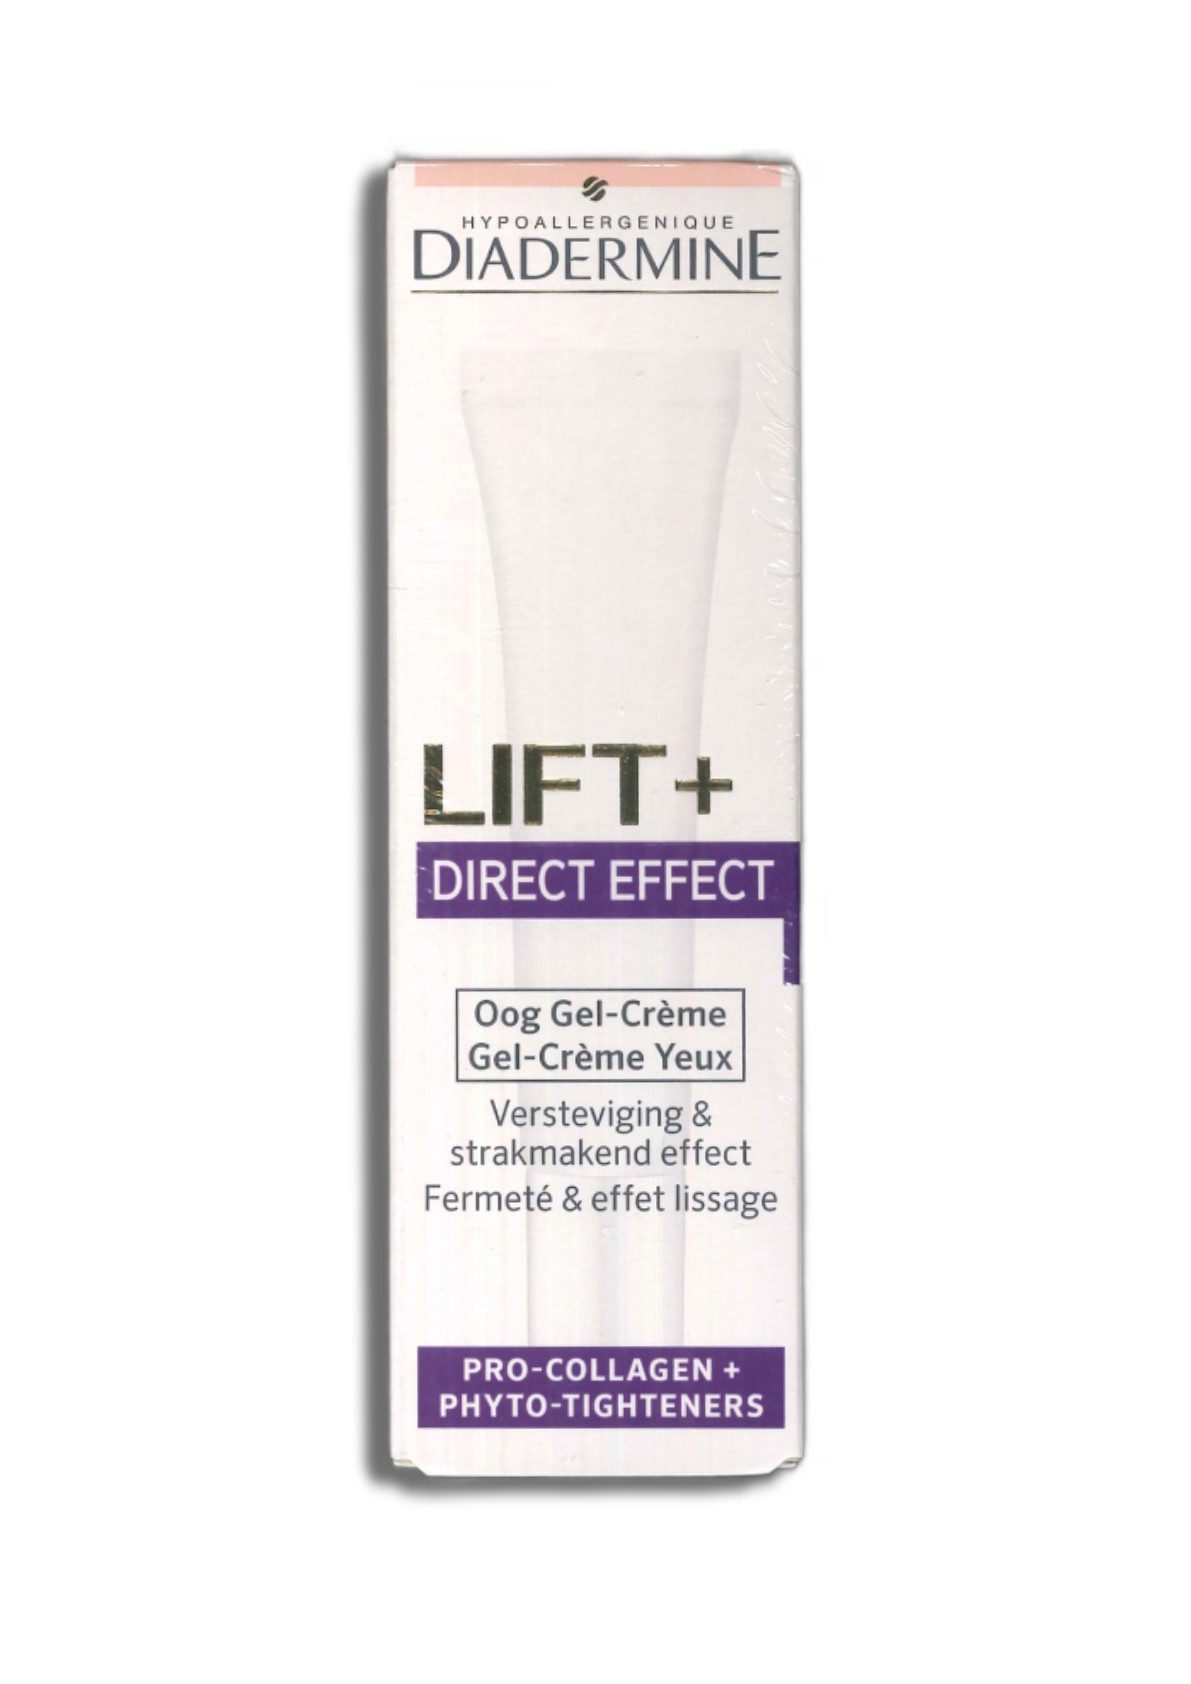 Diadermine Anti-Aging-Augencreme Lift+ Direct Effect 15ml